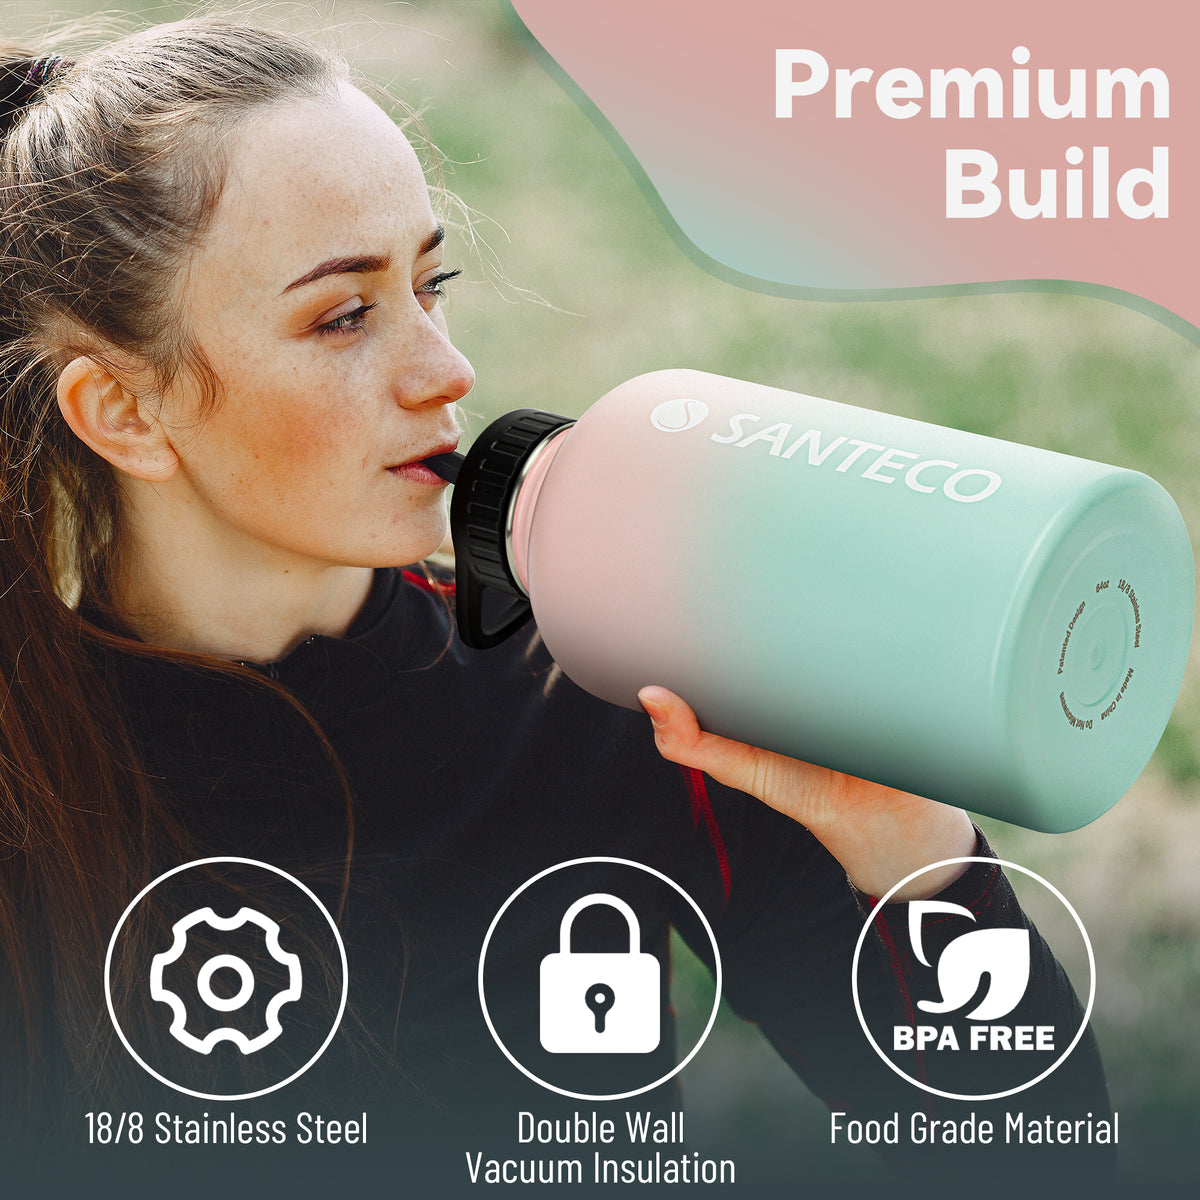 SANTECO water bottle 64 ounces (about 1.8 liters), half a gallon (about 1.8 liters) vacuum insulation stainless steel bottle, with straw handle cover, leak-proof, wide mouth and easy to clean, keep drinks hot and cold, suitable for gyms, camping, hiking